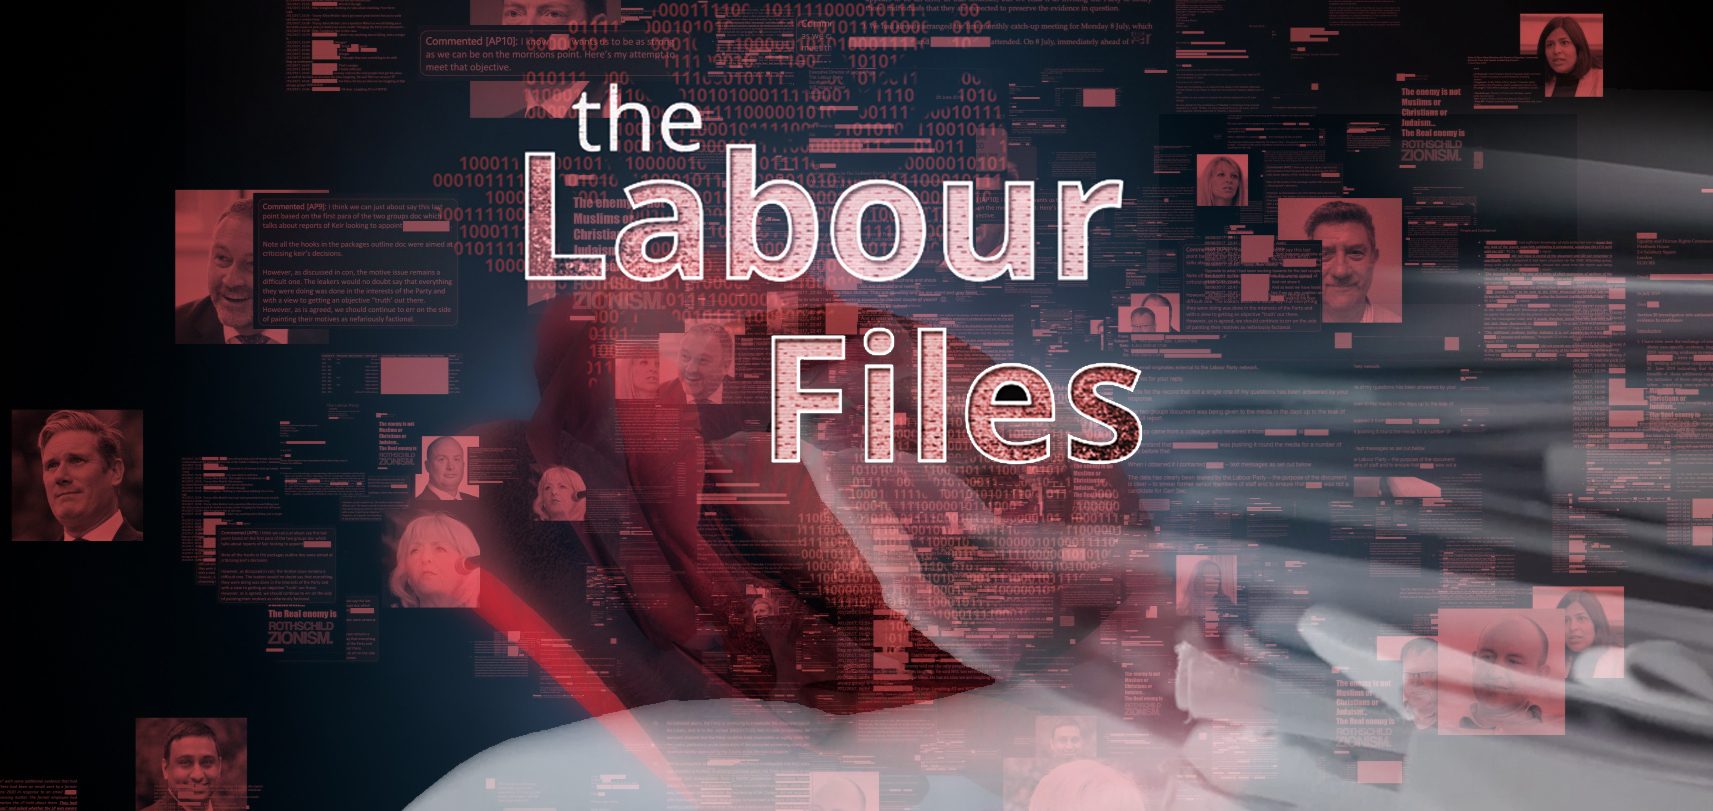 Documents reveal ongoing racism within British Labour Party